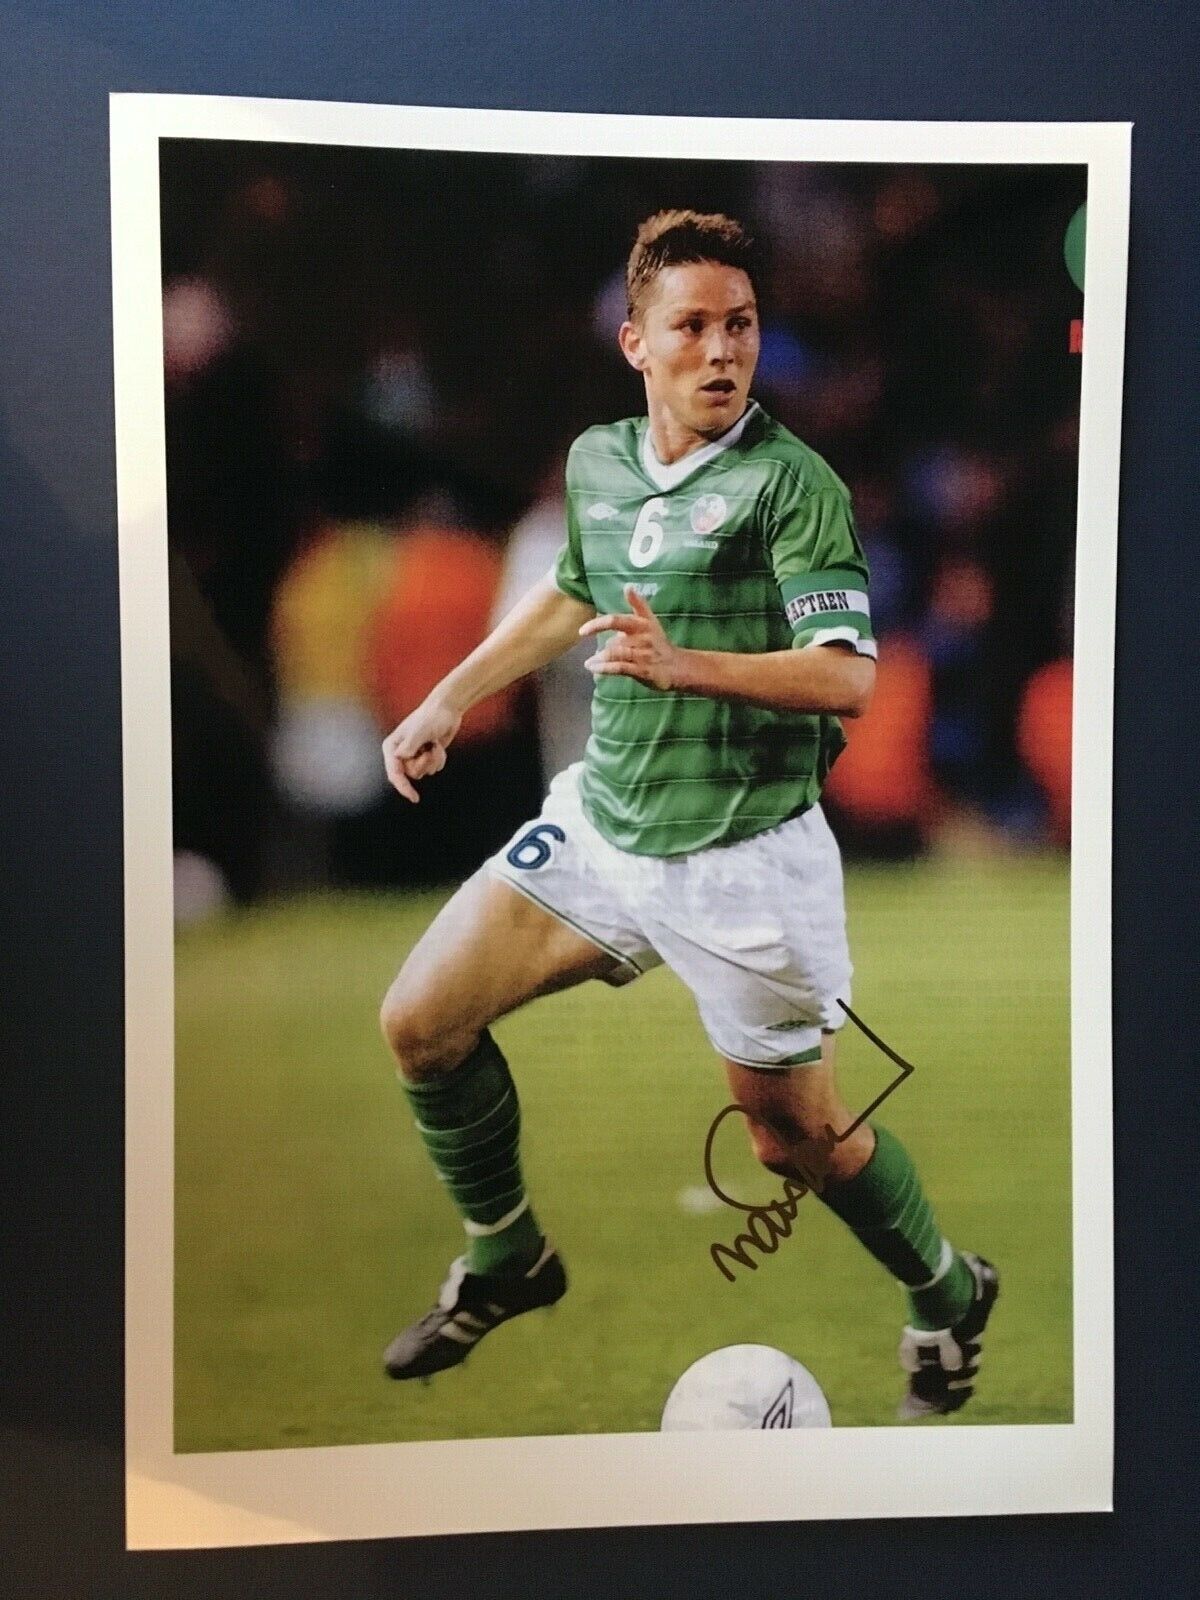 MATTY HOLLAND - REPUBLIC OF IRELAND FOOTBALLER - EXCELLENT SIGNED Photo Poster painting